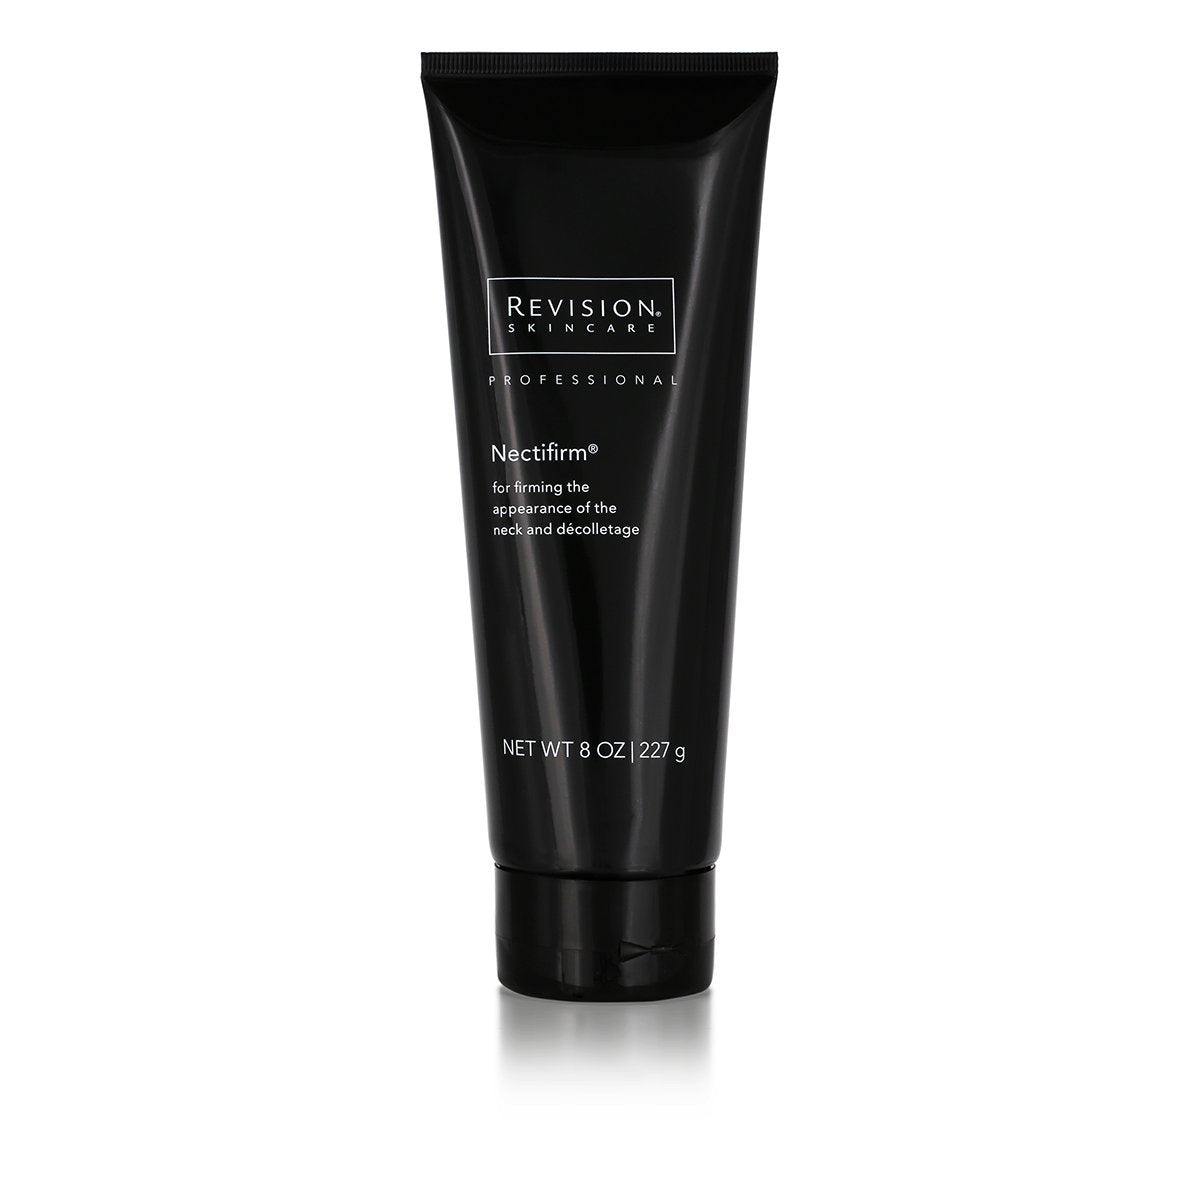 Revision Skincare Nectifirm® - Totality Skincare